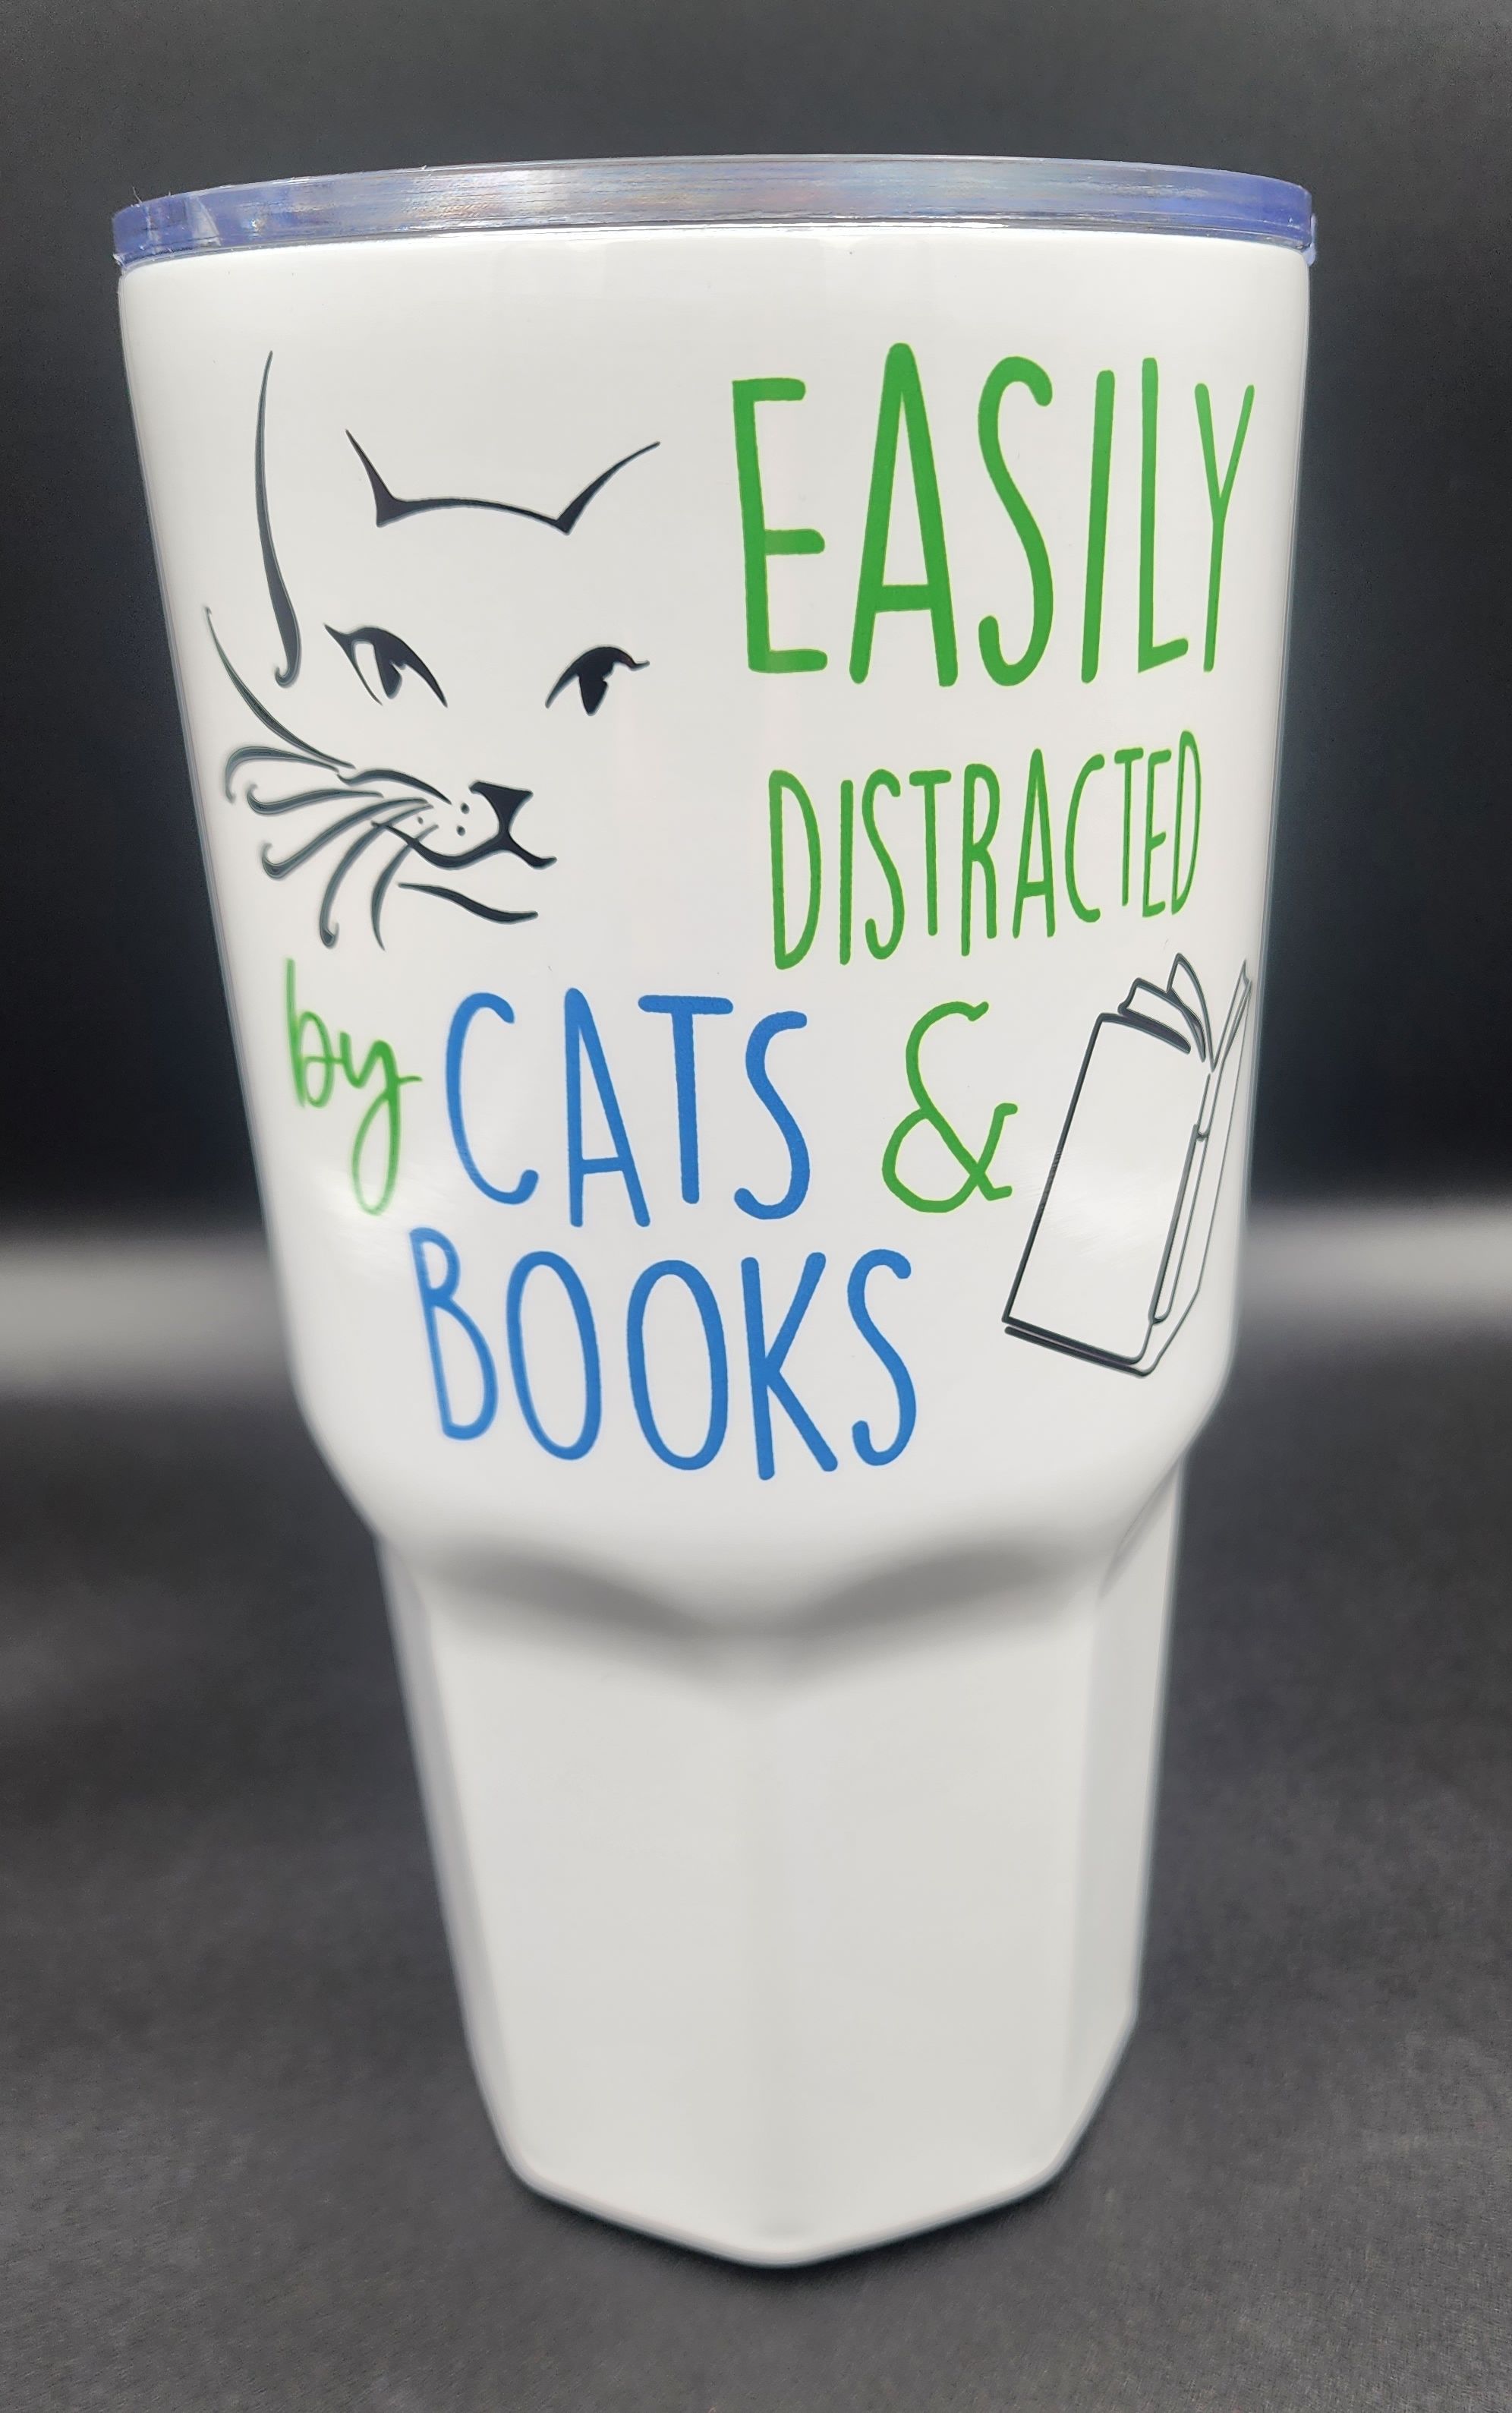 Cats & Books made with sublimation printing